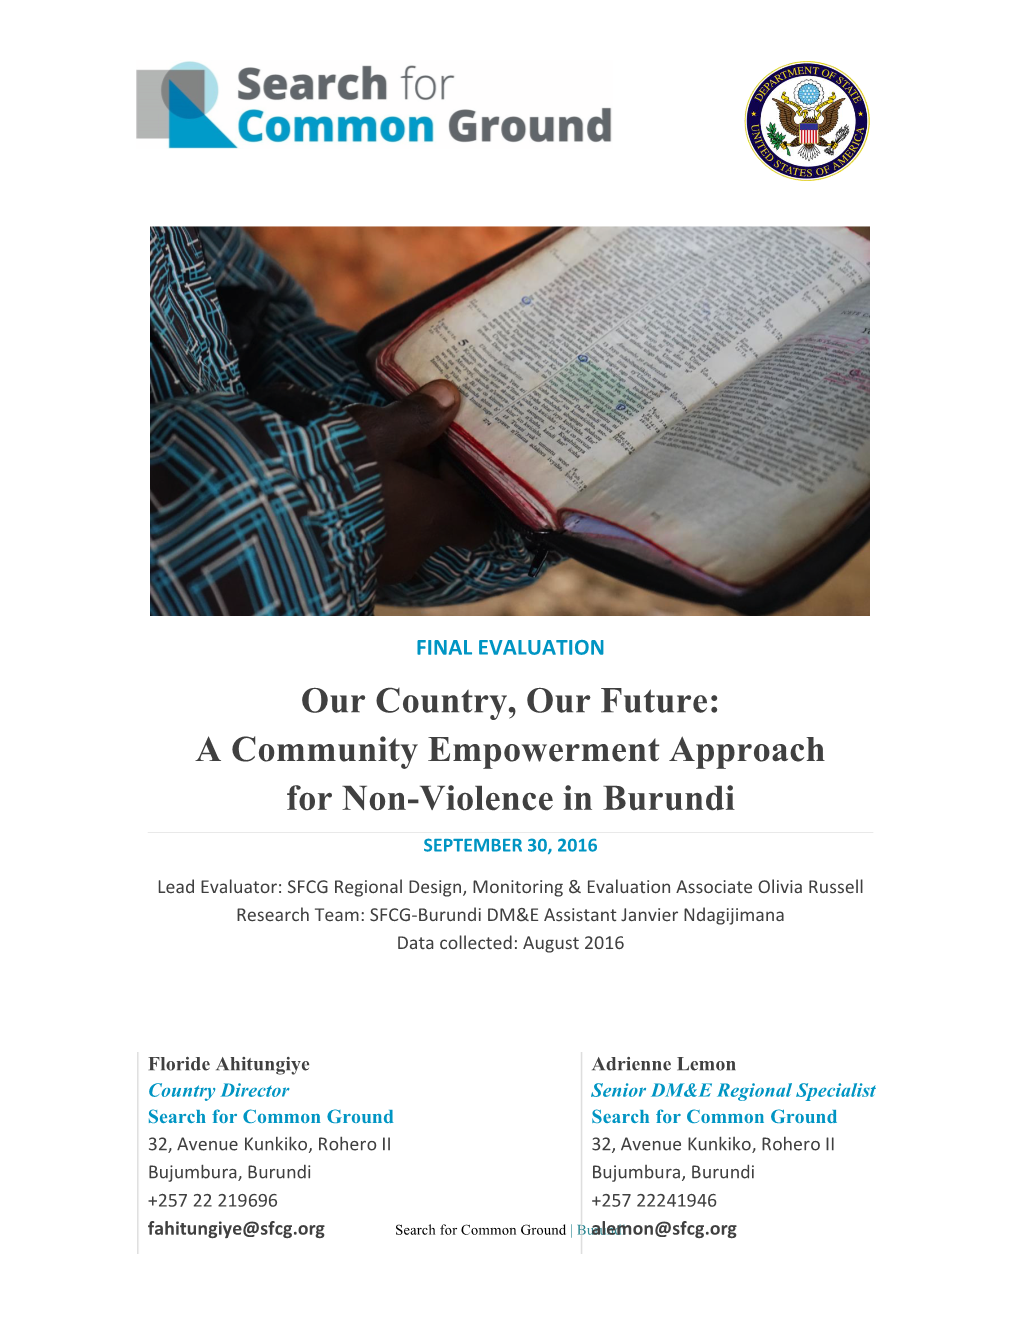 A Community Empowerment Approach for Non-Violence in Burundi SEPTEMBER 30, 2016